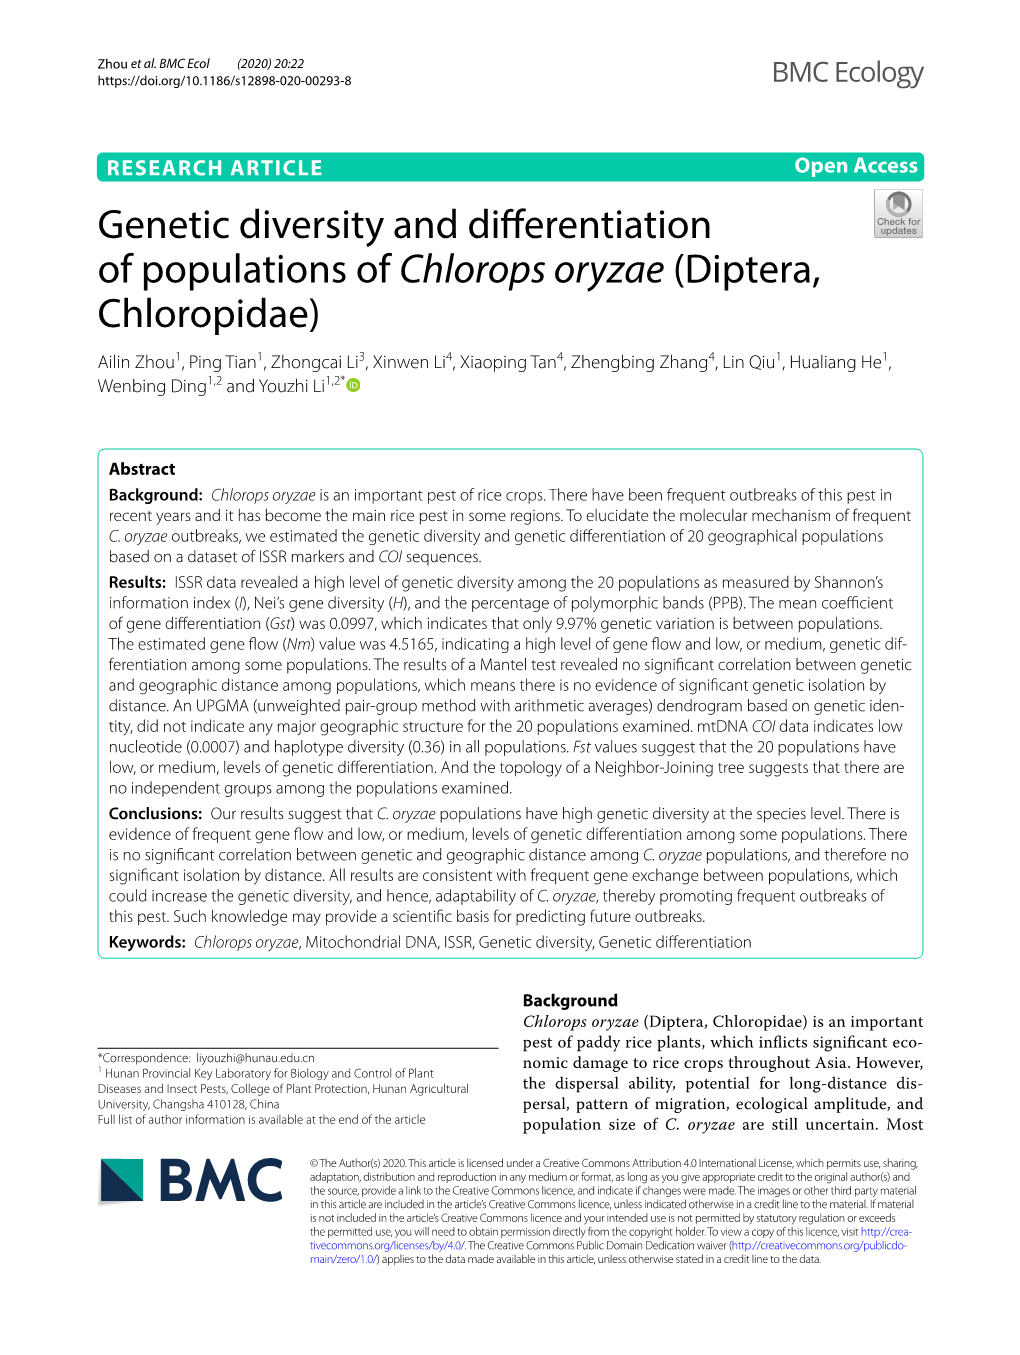 Genetic Diversity and Differentiation of Populations of Chlorops Oryzae